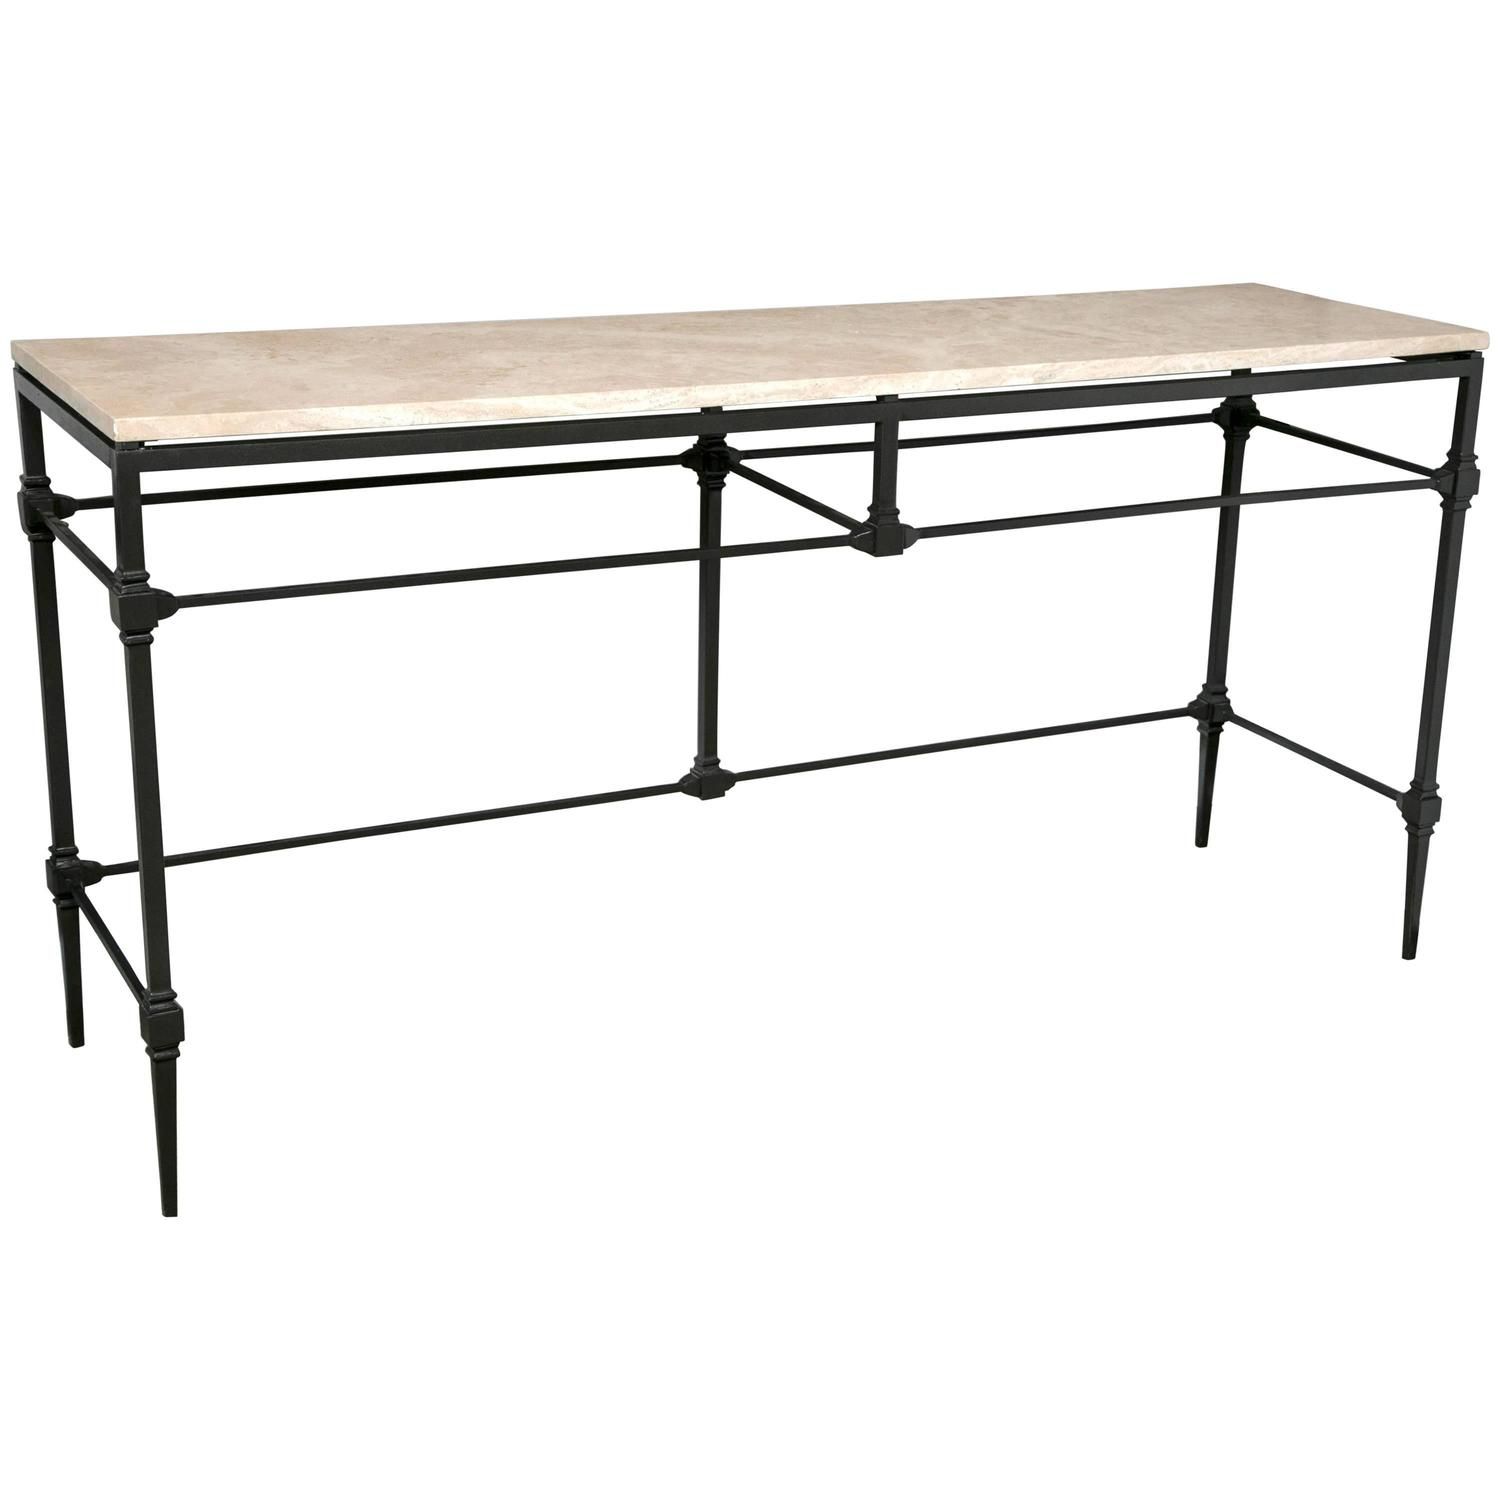 Wrought Iron Console/sofa Table For Sale At 1stdibs For Round Iron Console Tables (View 14 of 20)